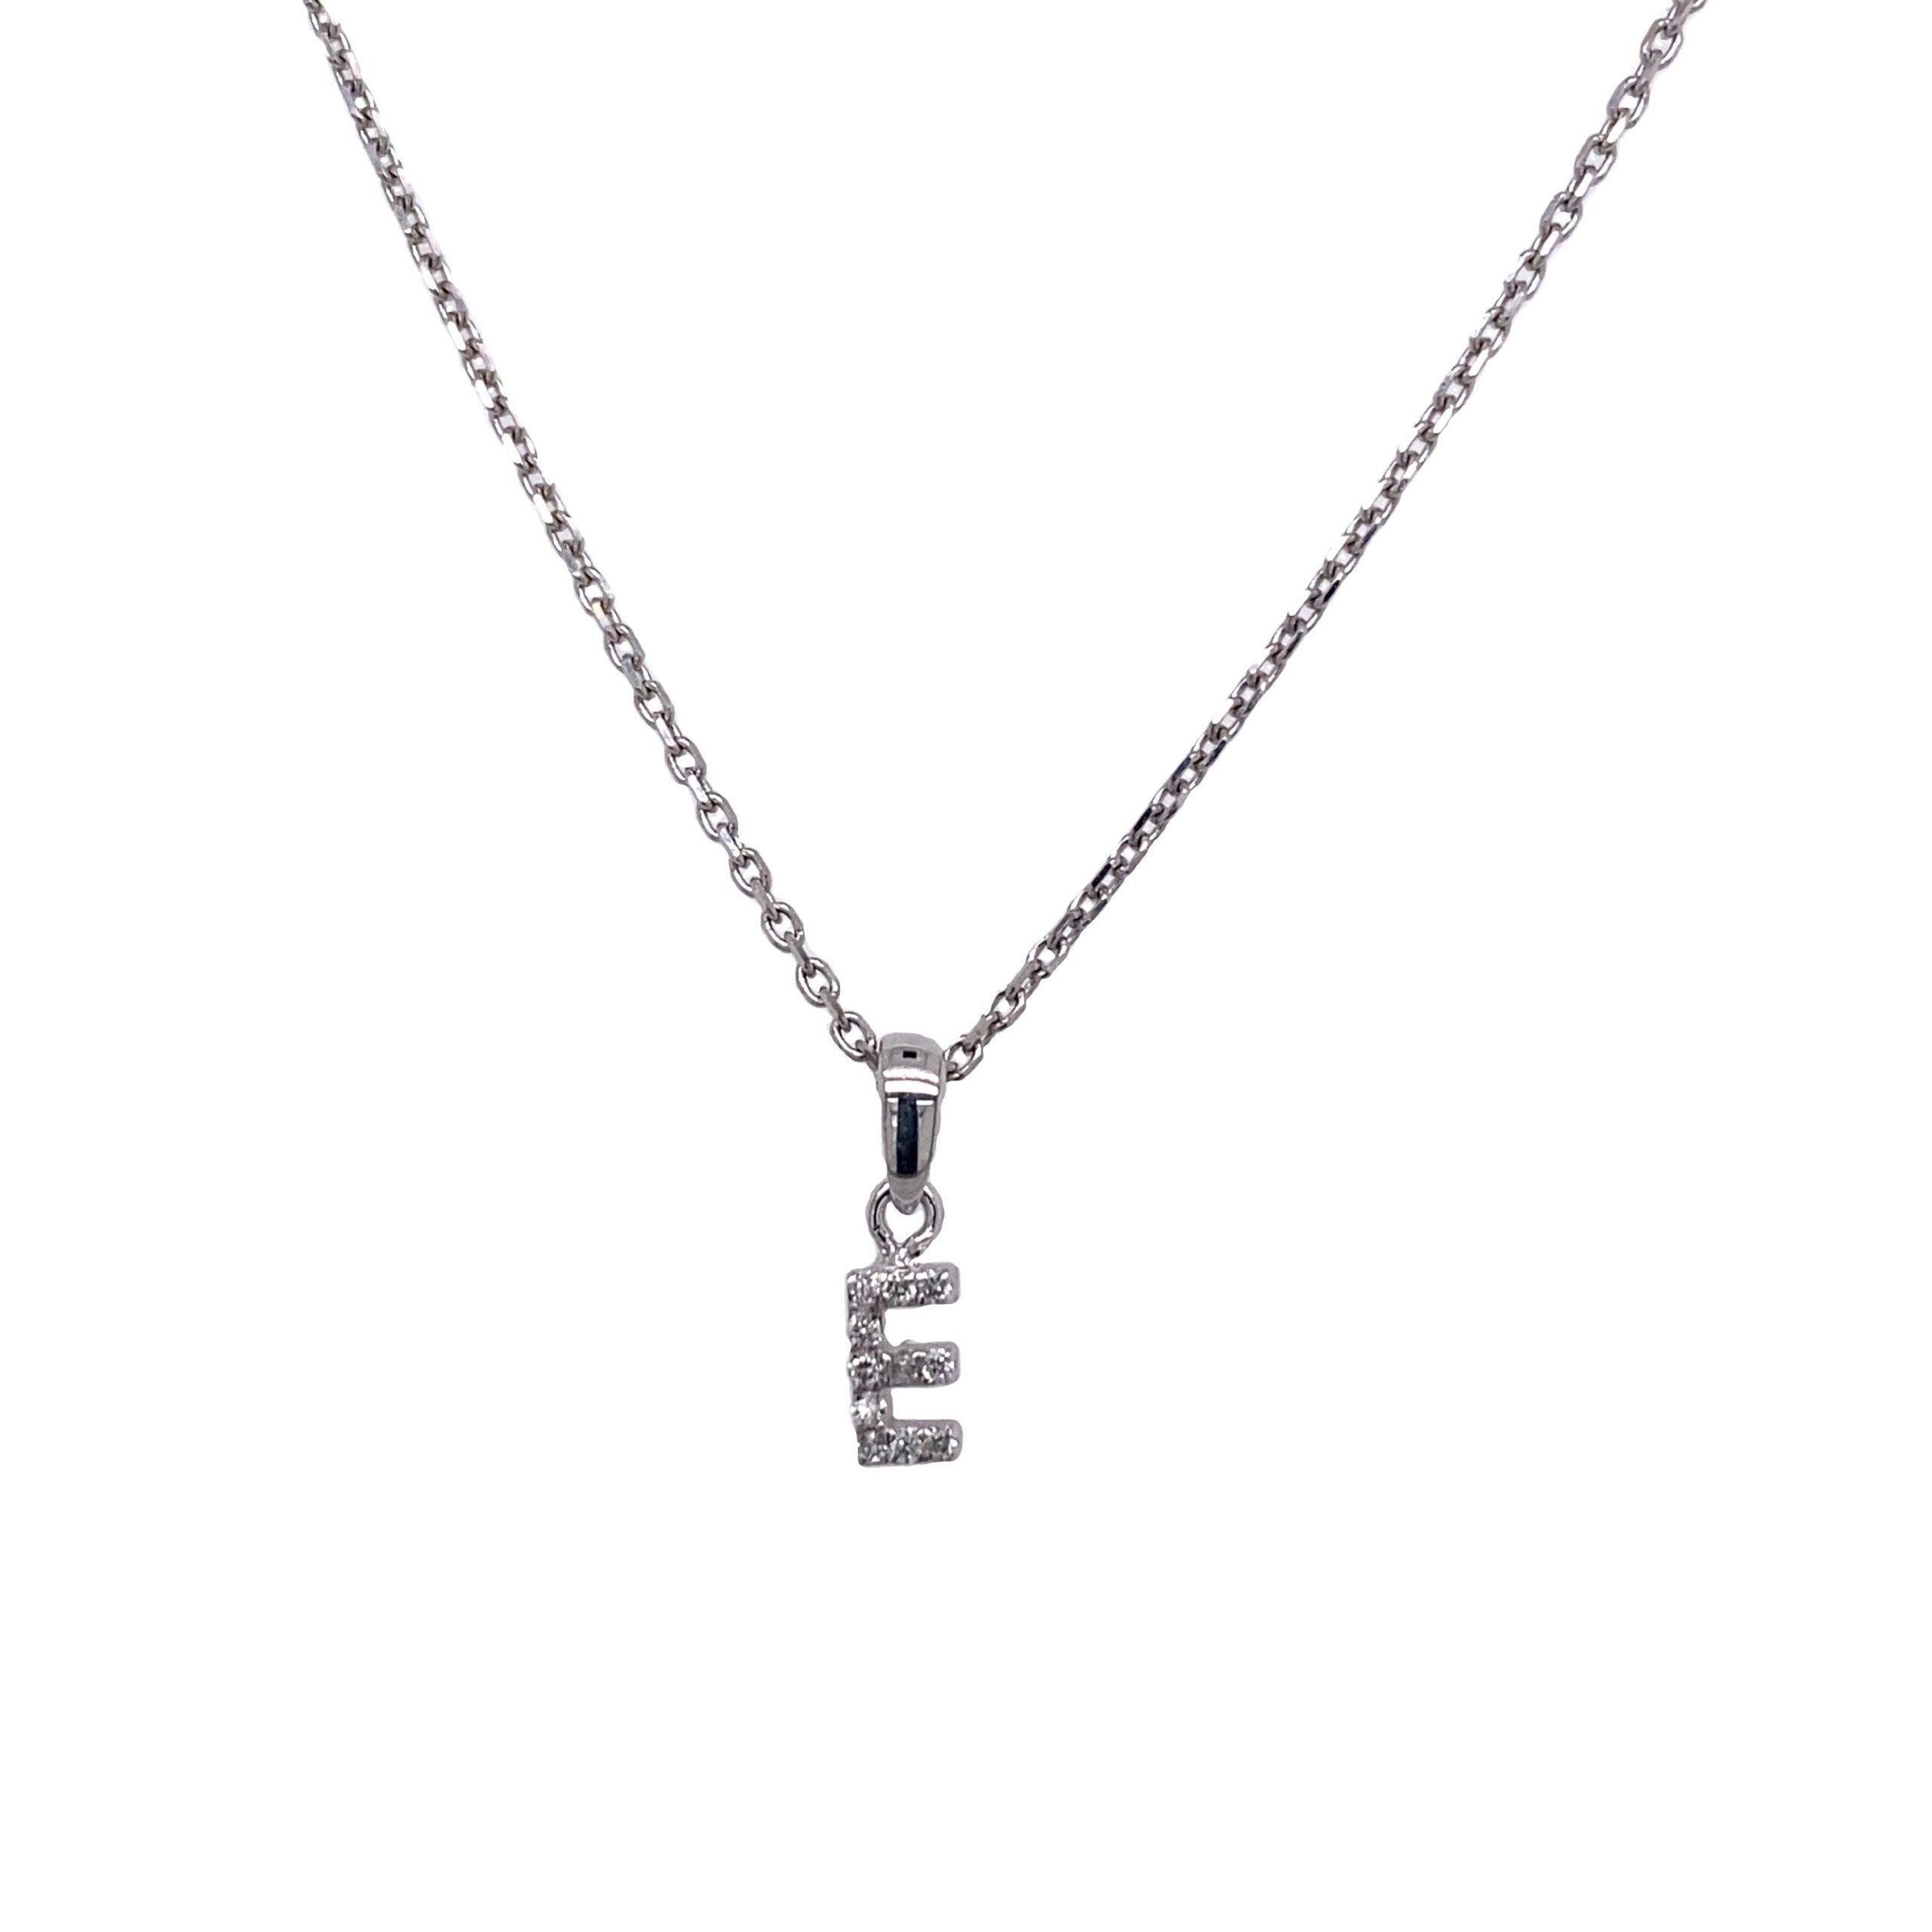 14ct White Gold Initial Pendant Letter “E” Set With 0.04ct Diamond On a 16″ Chain

Additional Information:
Total Diamond Weight: 0.04ct
Diamond Colour: G/H
Diamond Clarity: SI
Total Weight Chain: 1.6g
Necklace Length: 16